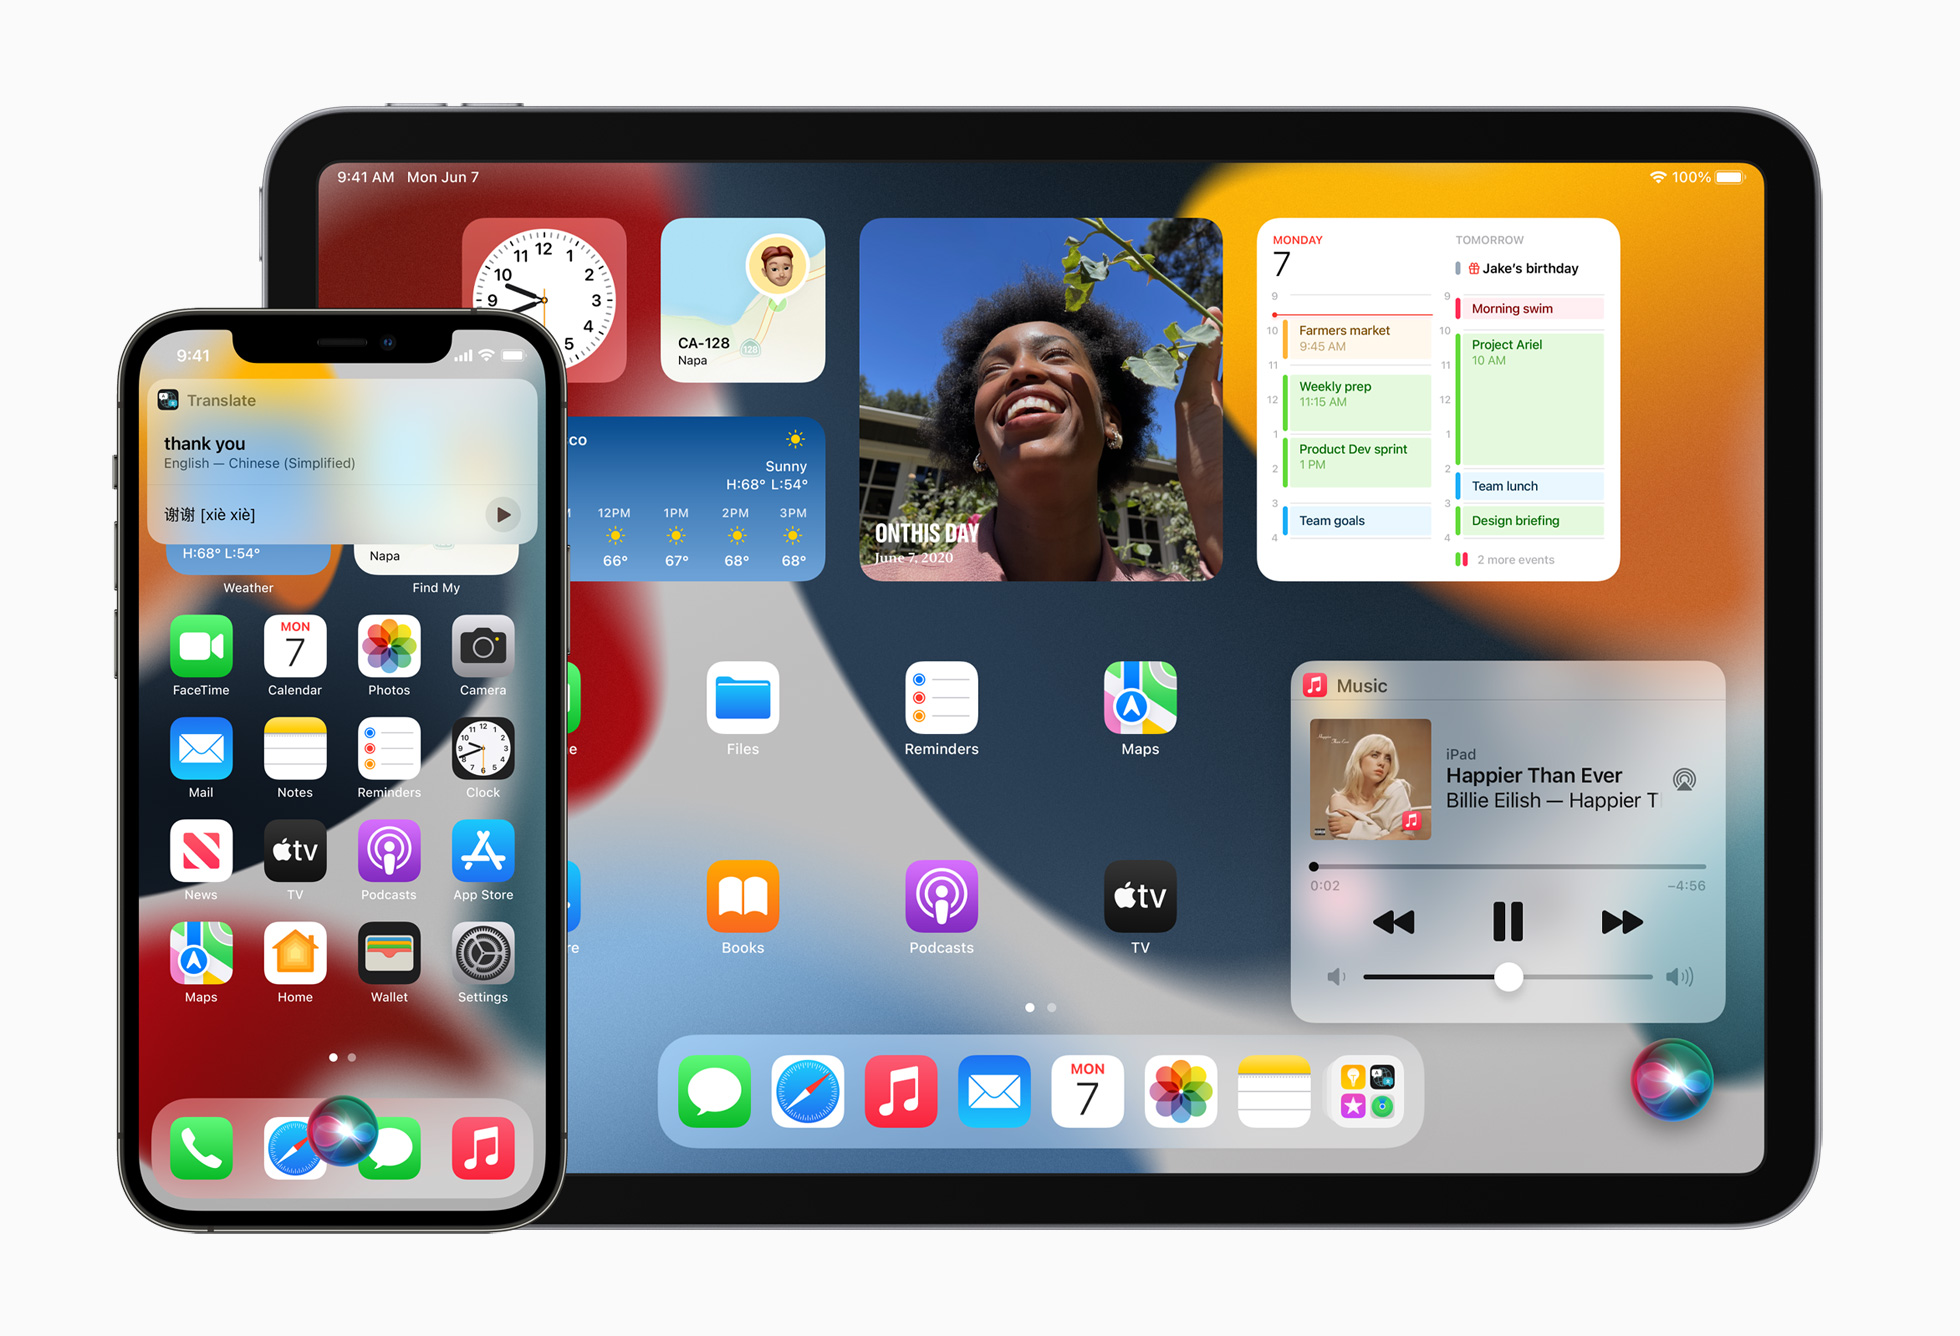 A teaser image showing iOS 15 Siri running on the iPhone and iPad